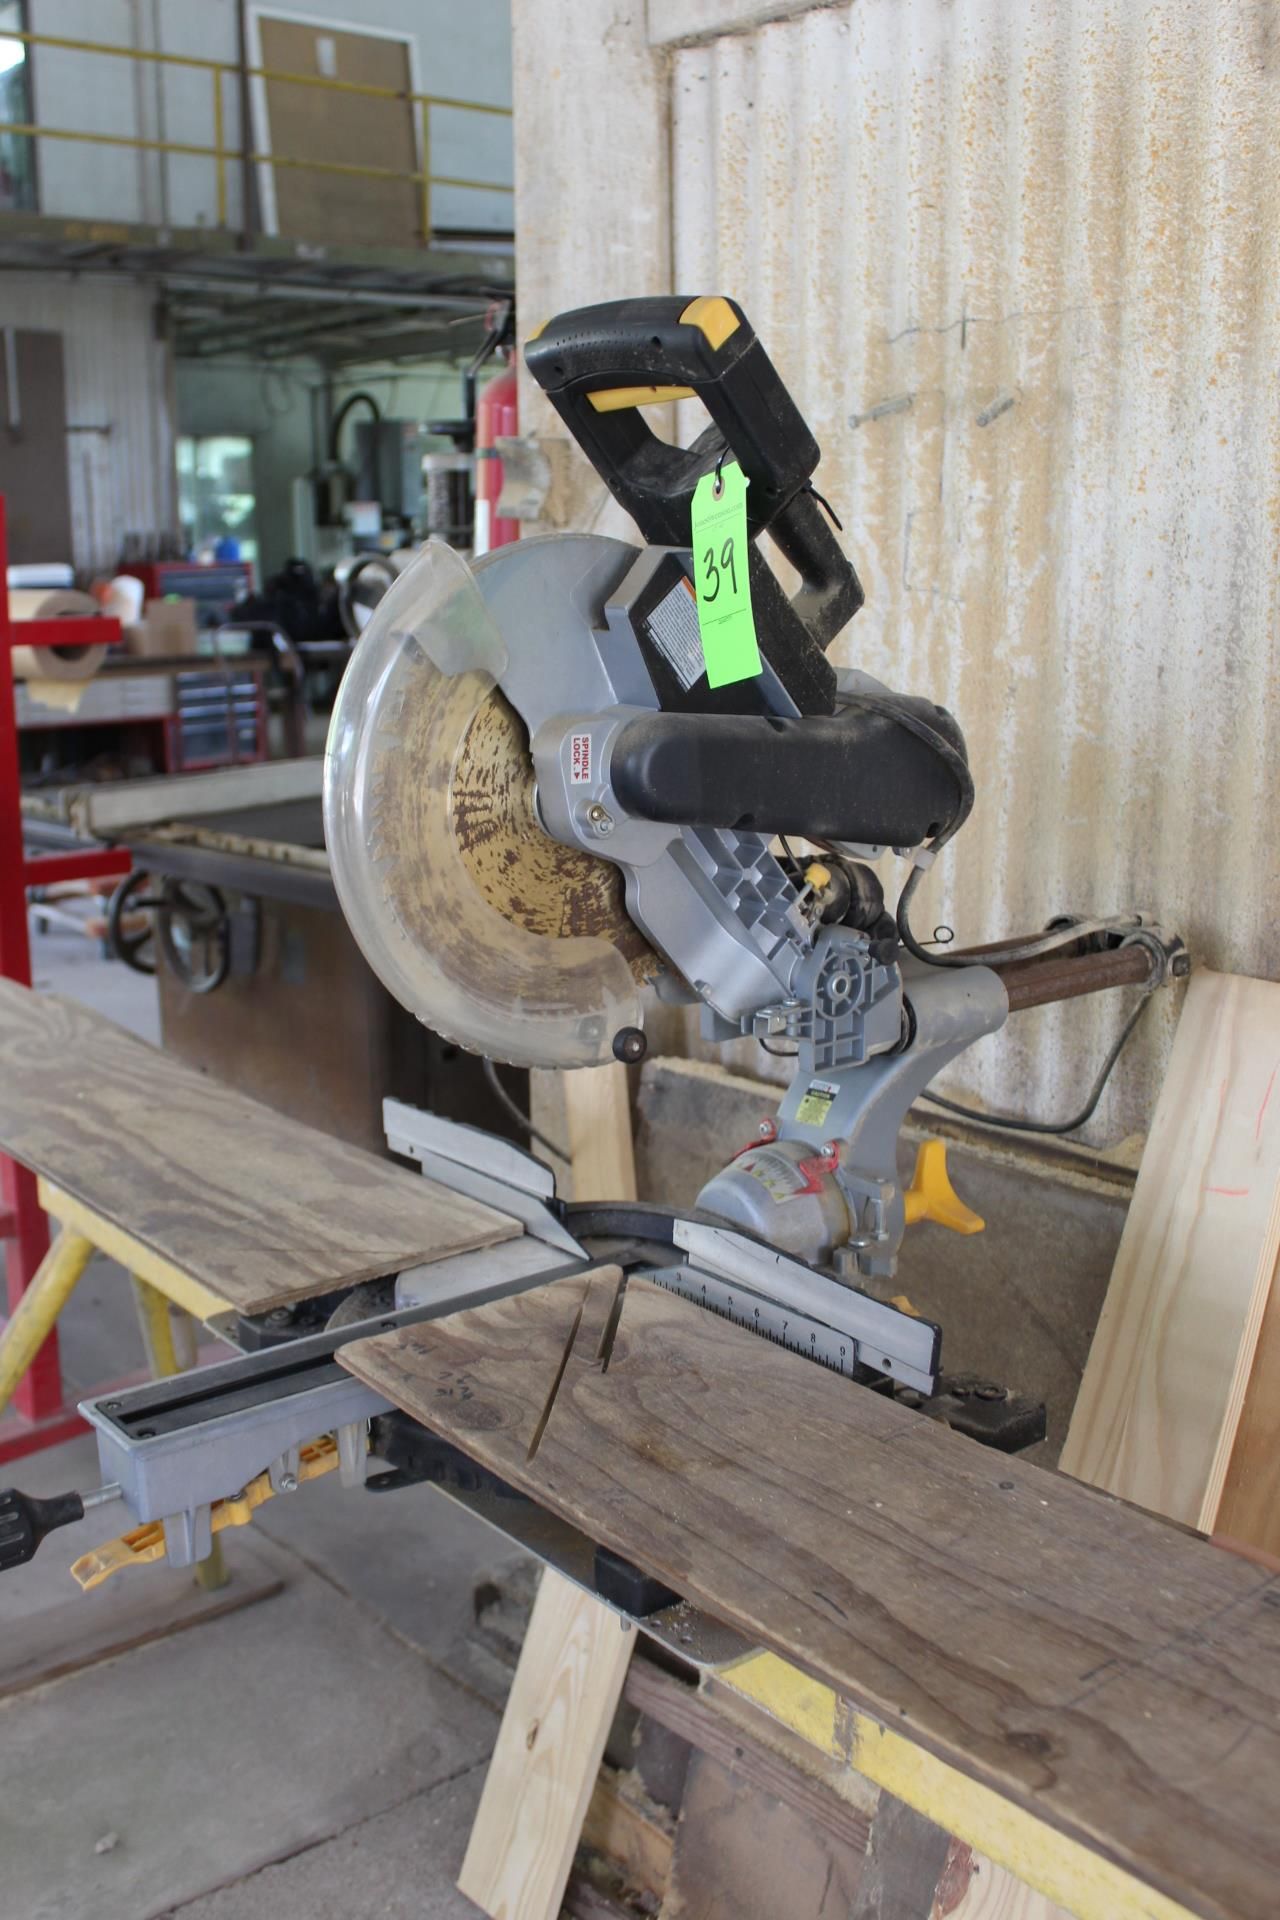 Chicago Electric 12" Double-Bevel Sliding Compound Miter Saw with Laser Guide, with Stand - Image 2 of 4